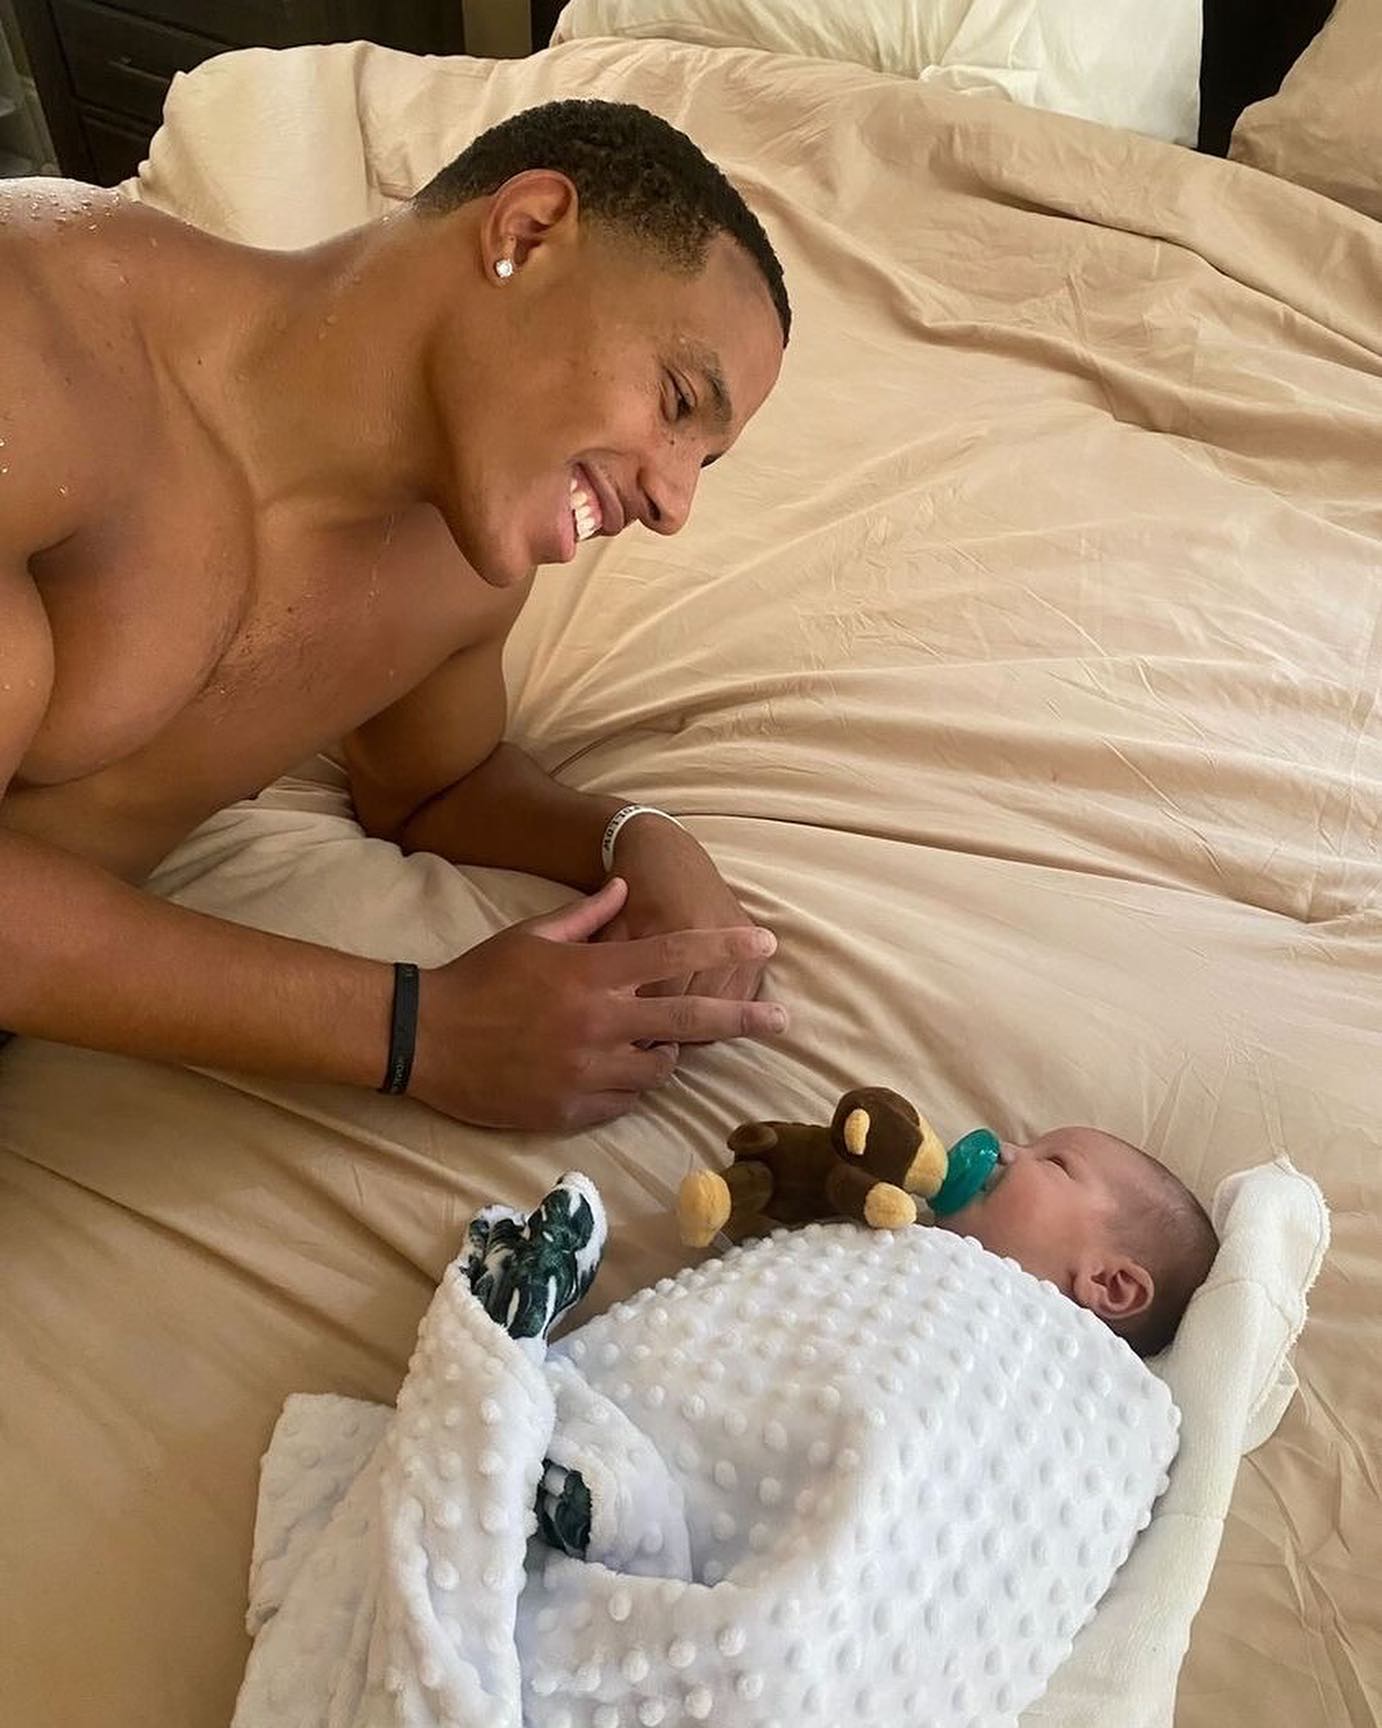 Take a moment to salute @_dbane1 becoming a father...